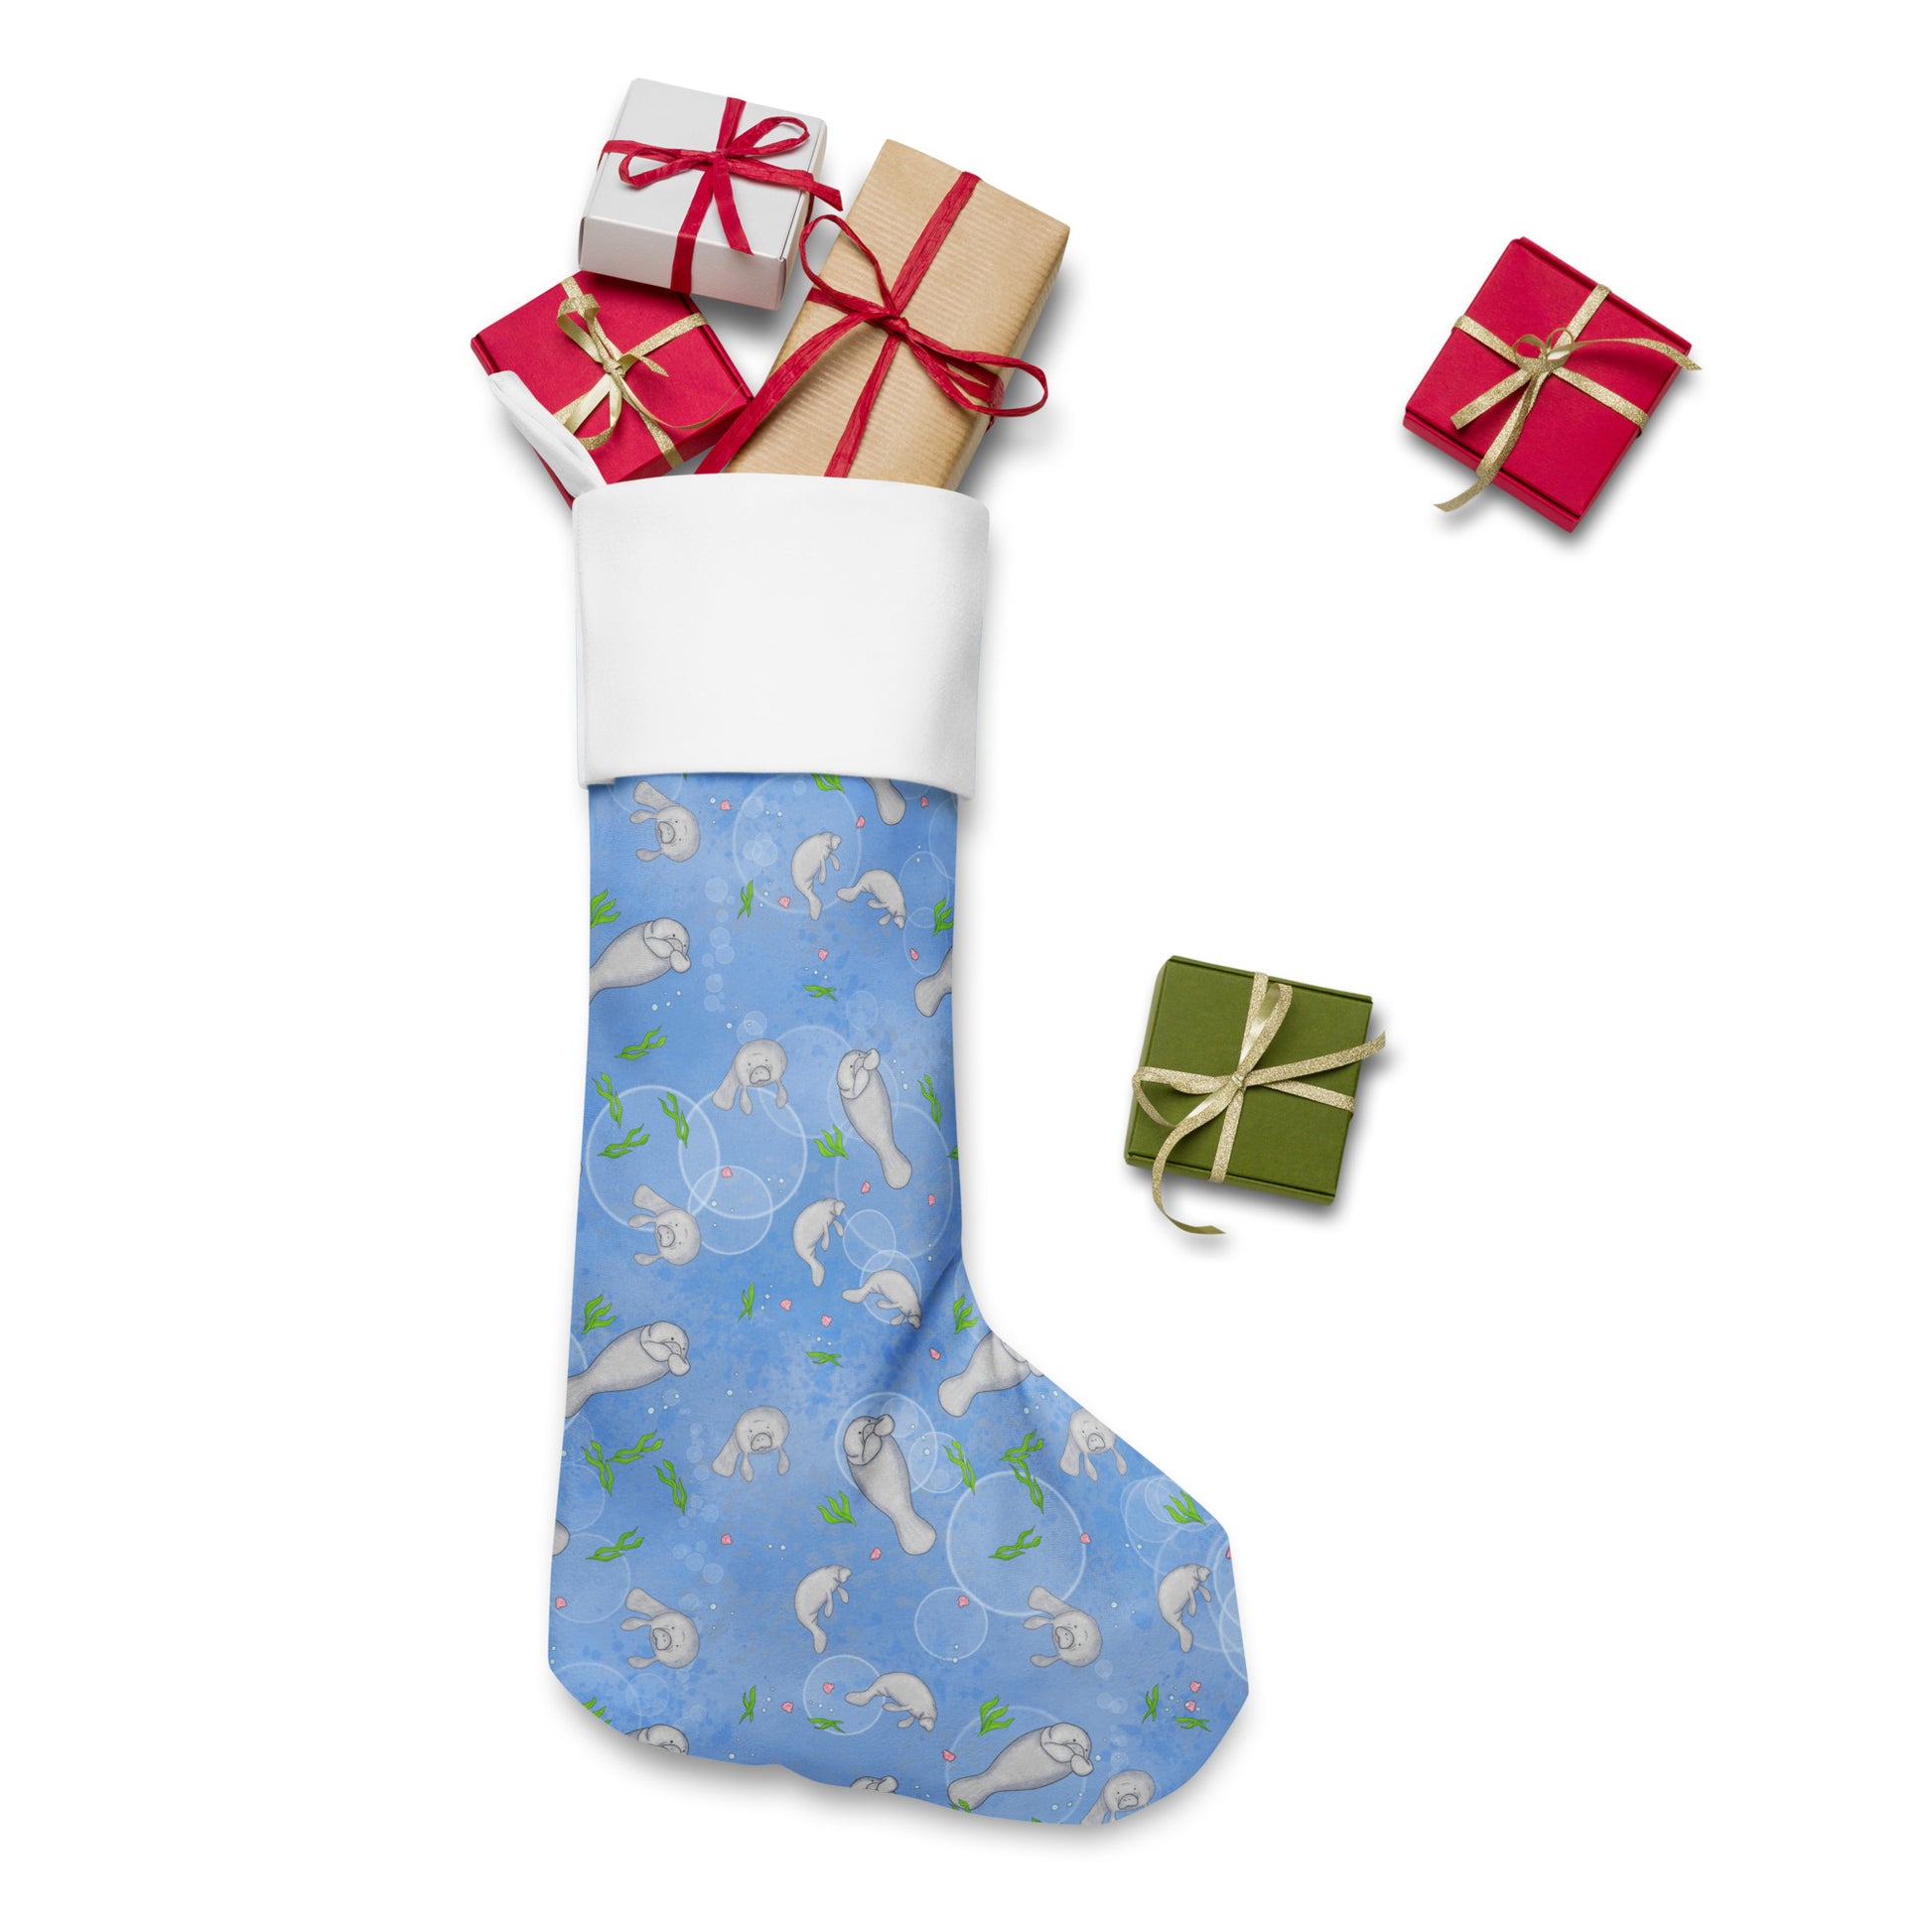 Limited Edition Manatee Christmas Stocking.  7 by 18 inches. The front has a hand-illustrated manatee design with an off-white polyester fabric on the back. It has a white fold-over cuff and a loop for hanging. Shown stuffed with presents.